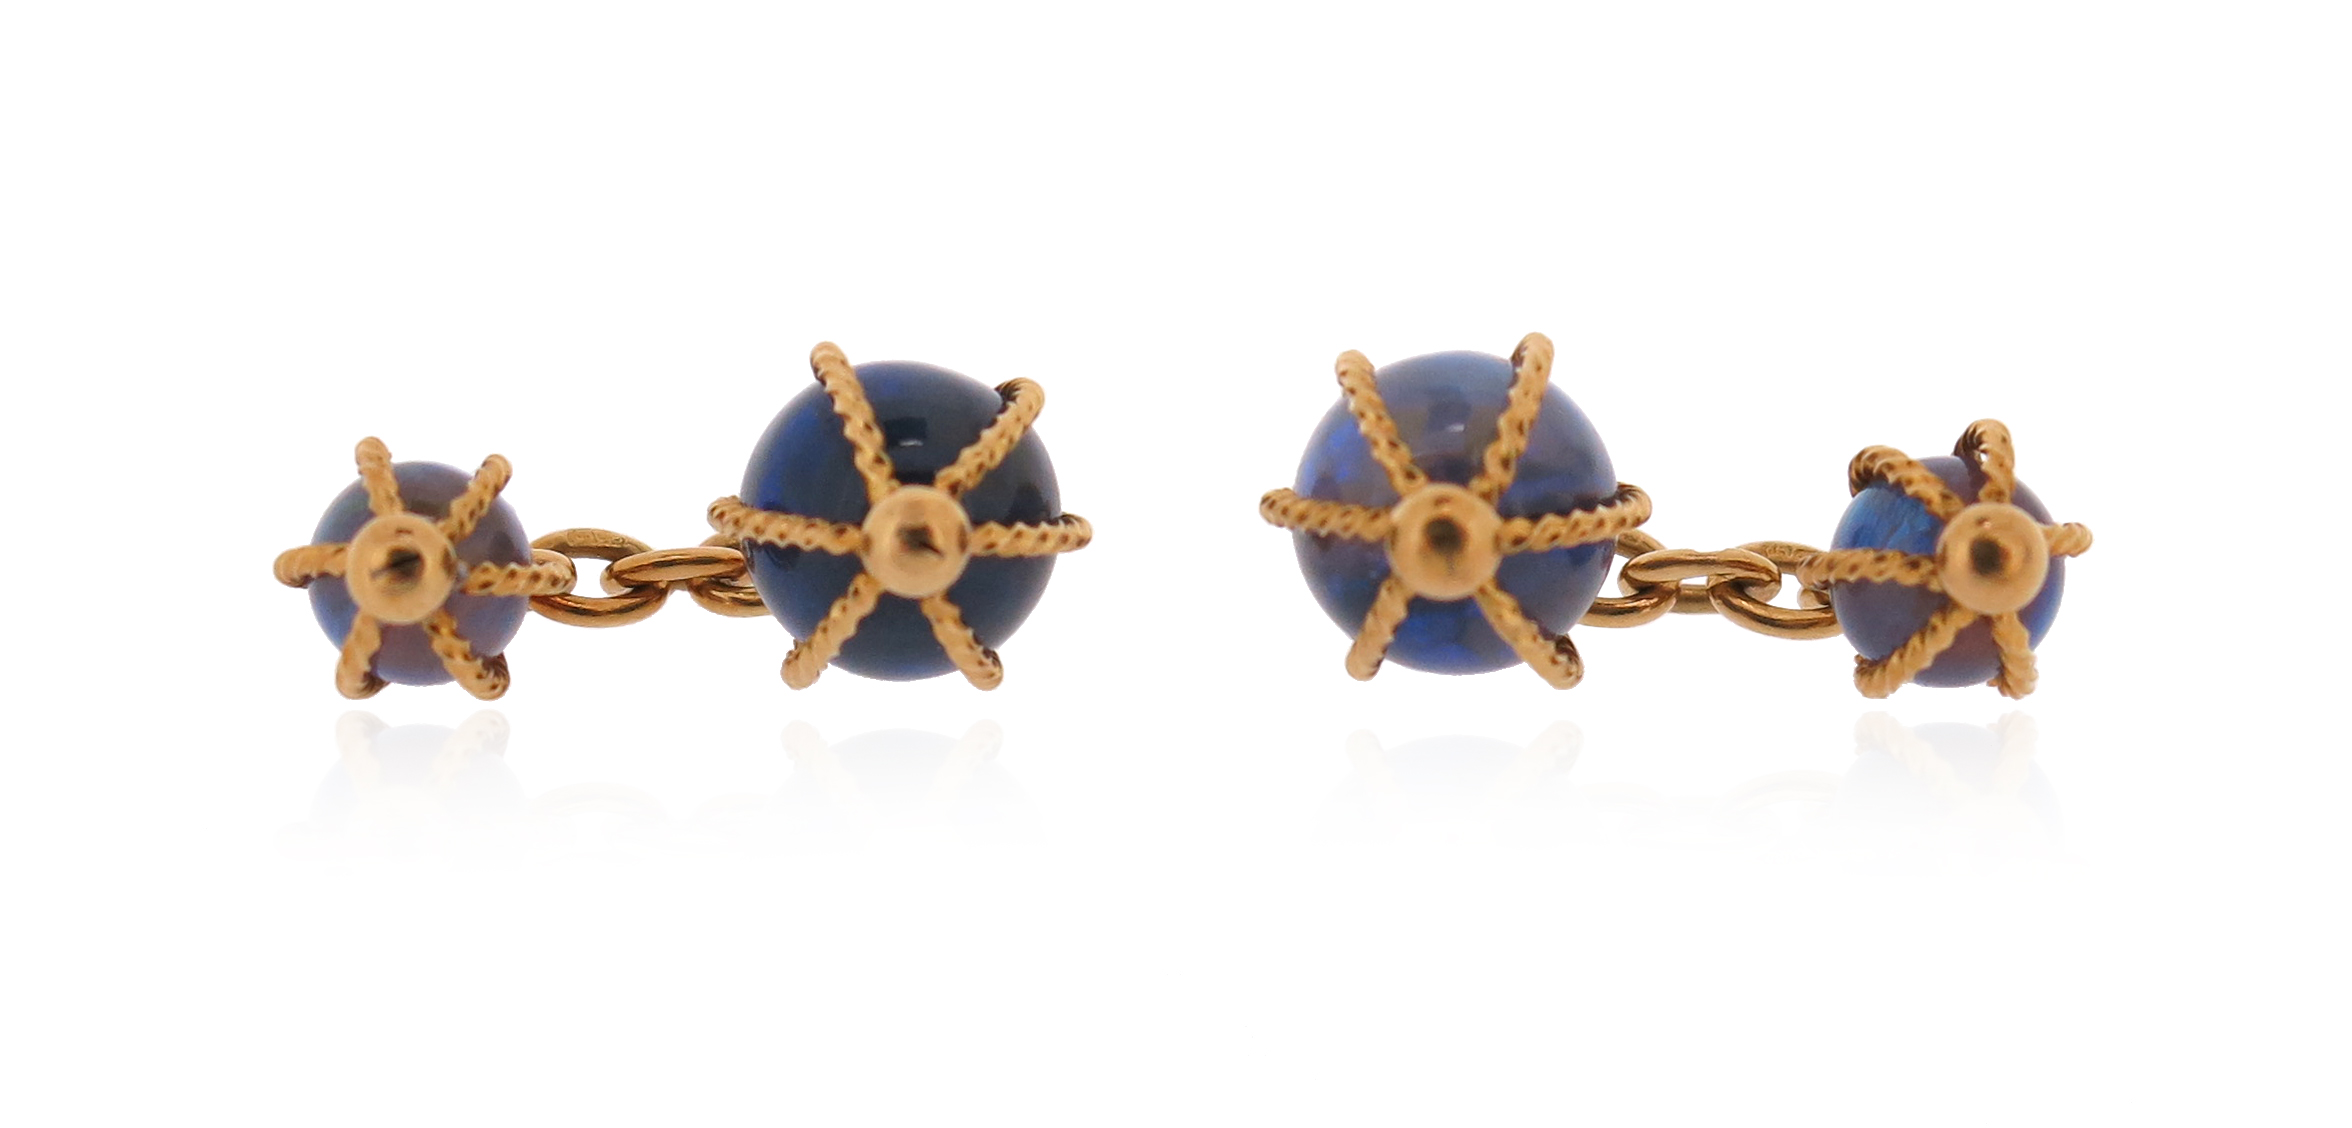 A pair of opal bead-mounted gold cufflinks, each opal bead contained in an 18ct yellow gold cage - Image 2 of 2